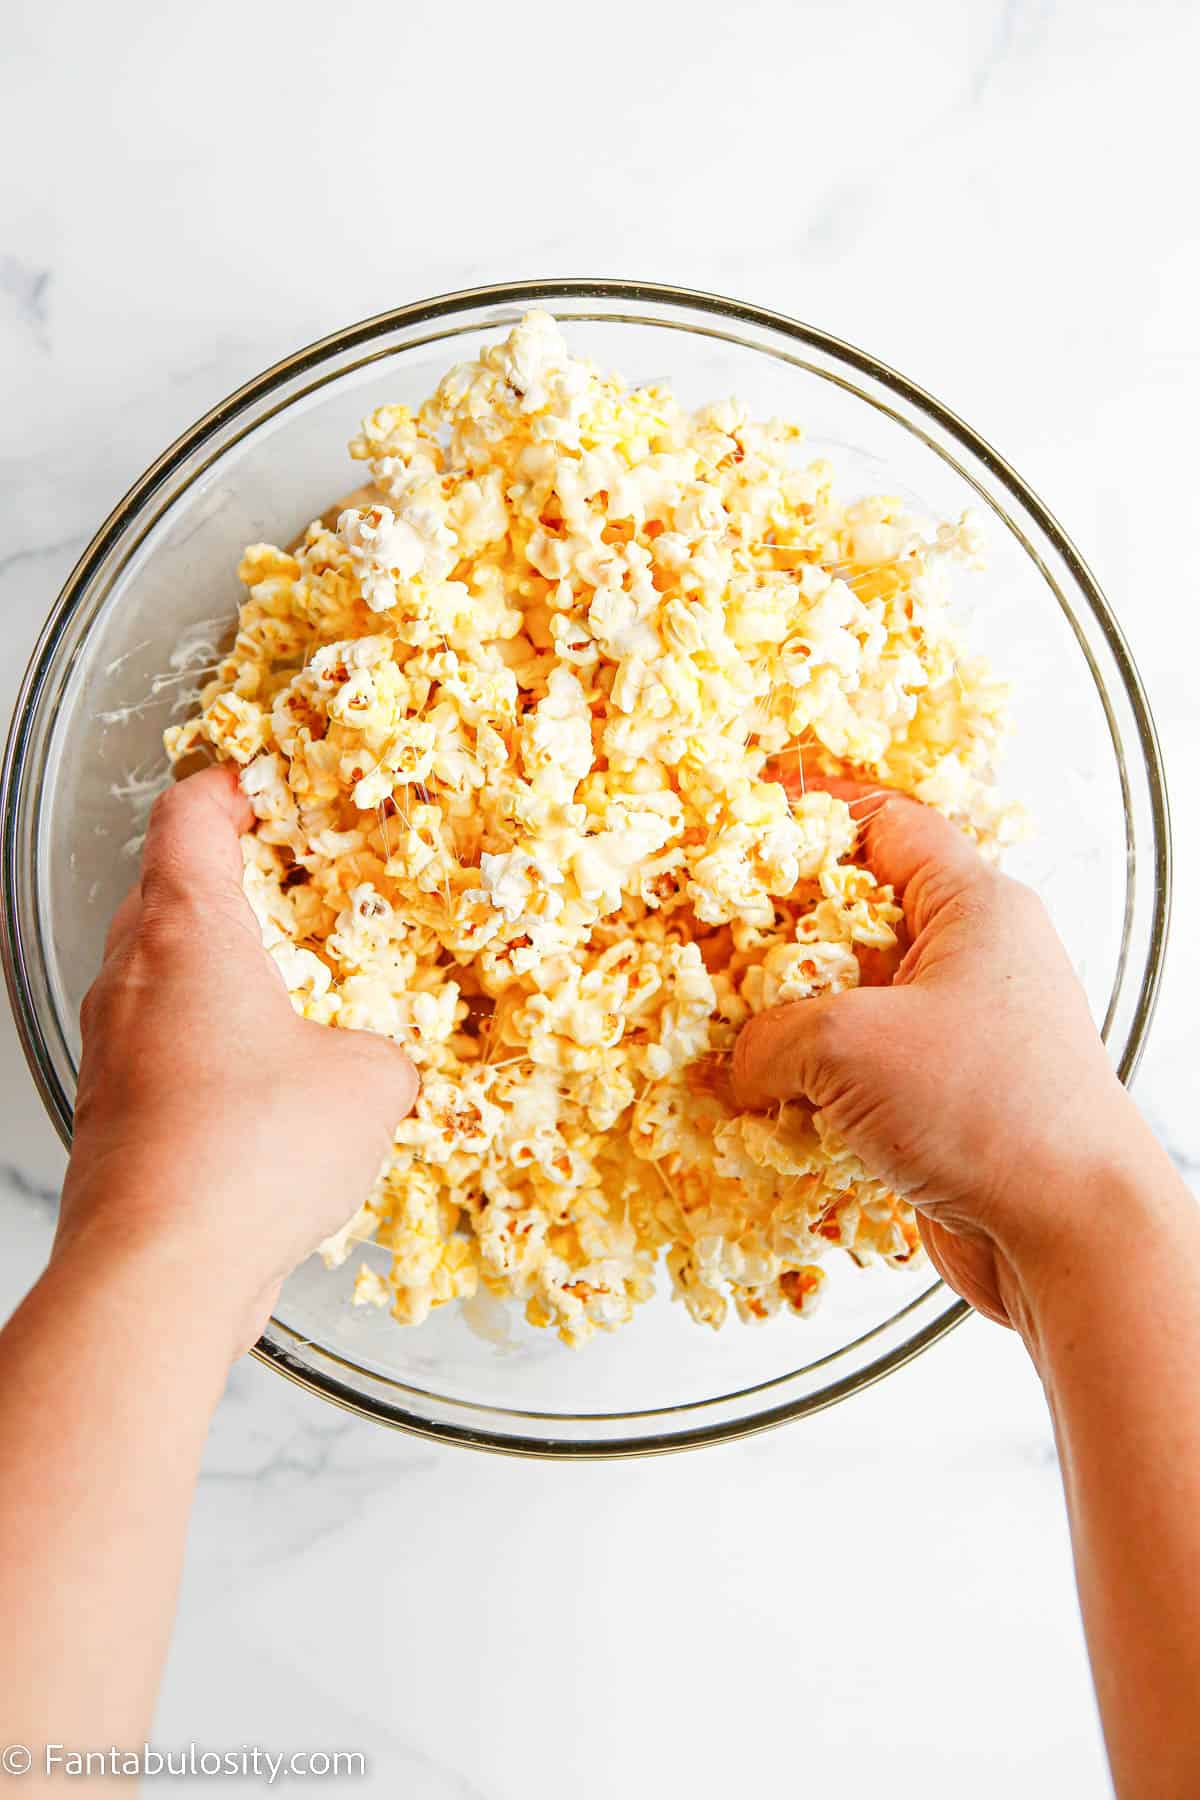 Two hands are mixing together a bowl of popped popcorn and melted marshmallow